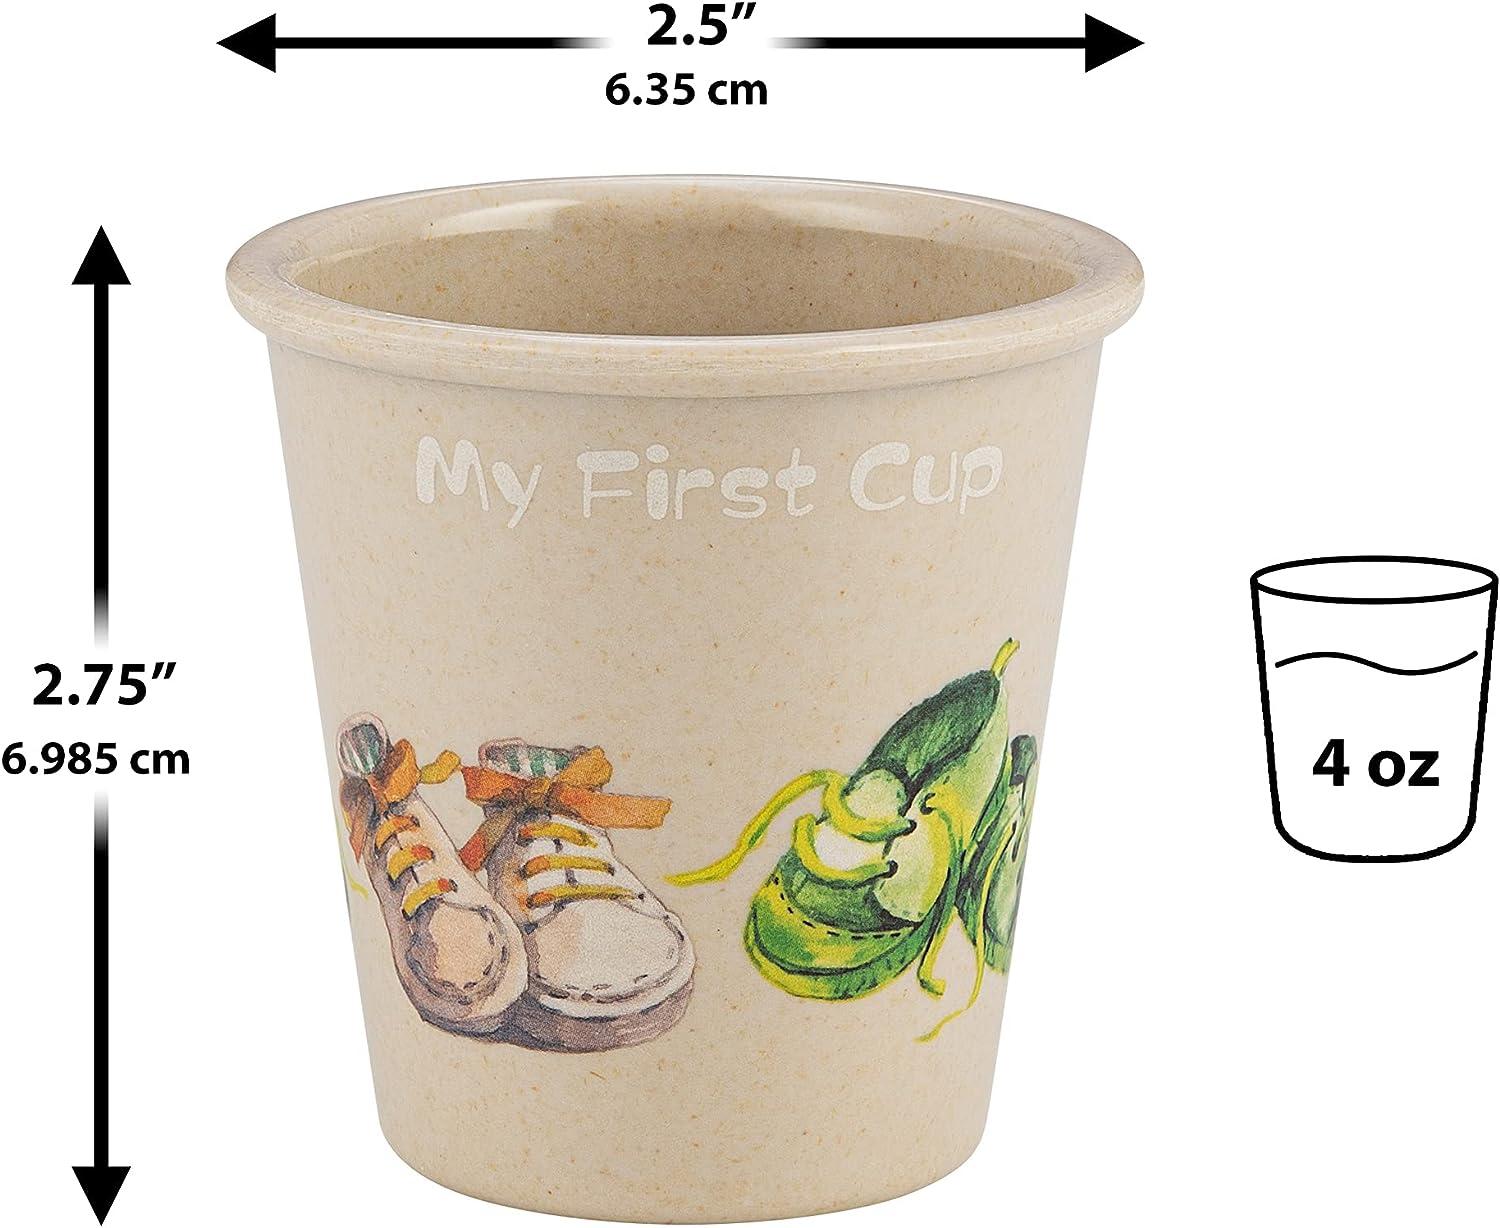 WeeSprout Bamboo Toddler Cups - 4 PC Set (10 fl oz) Organic & Non-Plastic Cup Pack for Toddlers Big Kids or Baby Natural 10 oz (Without Lids) Blue Ye